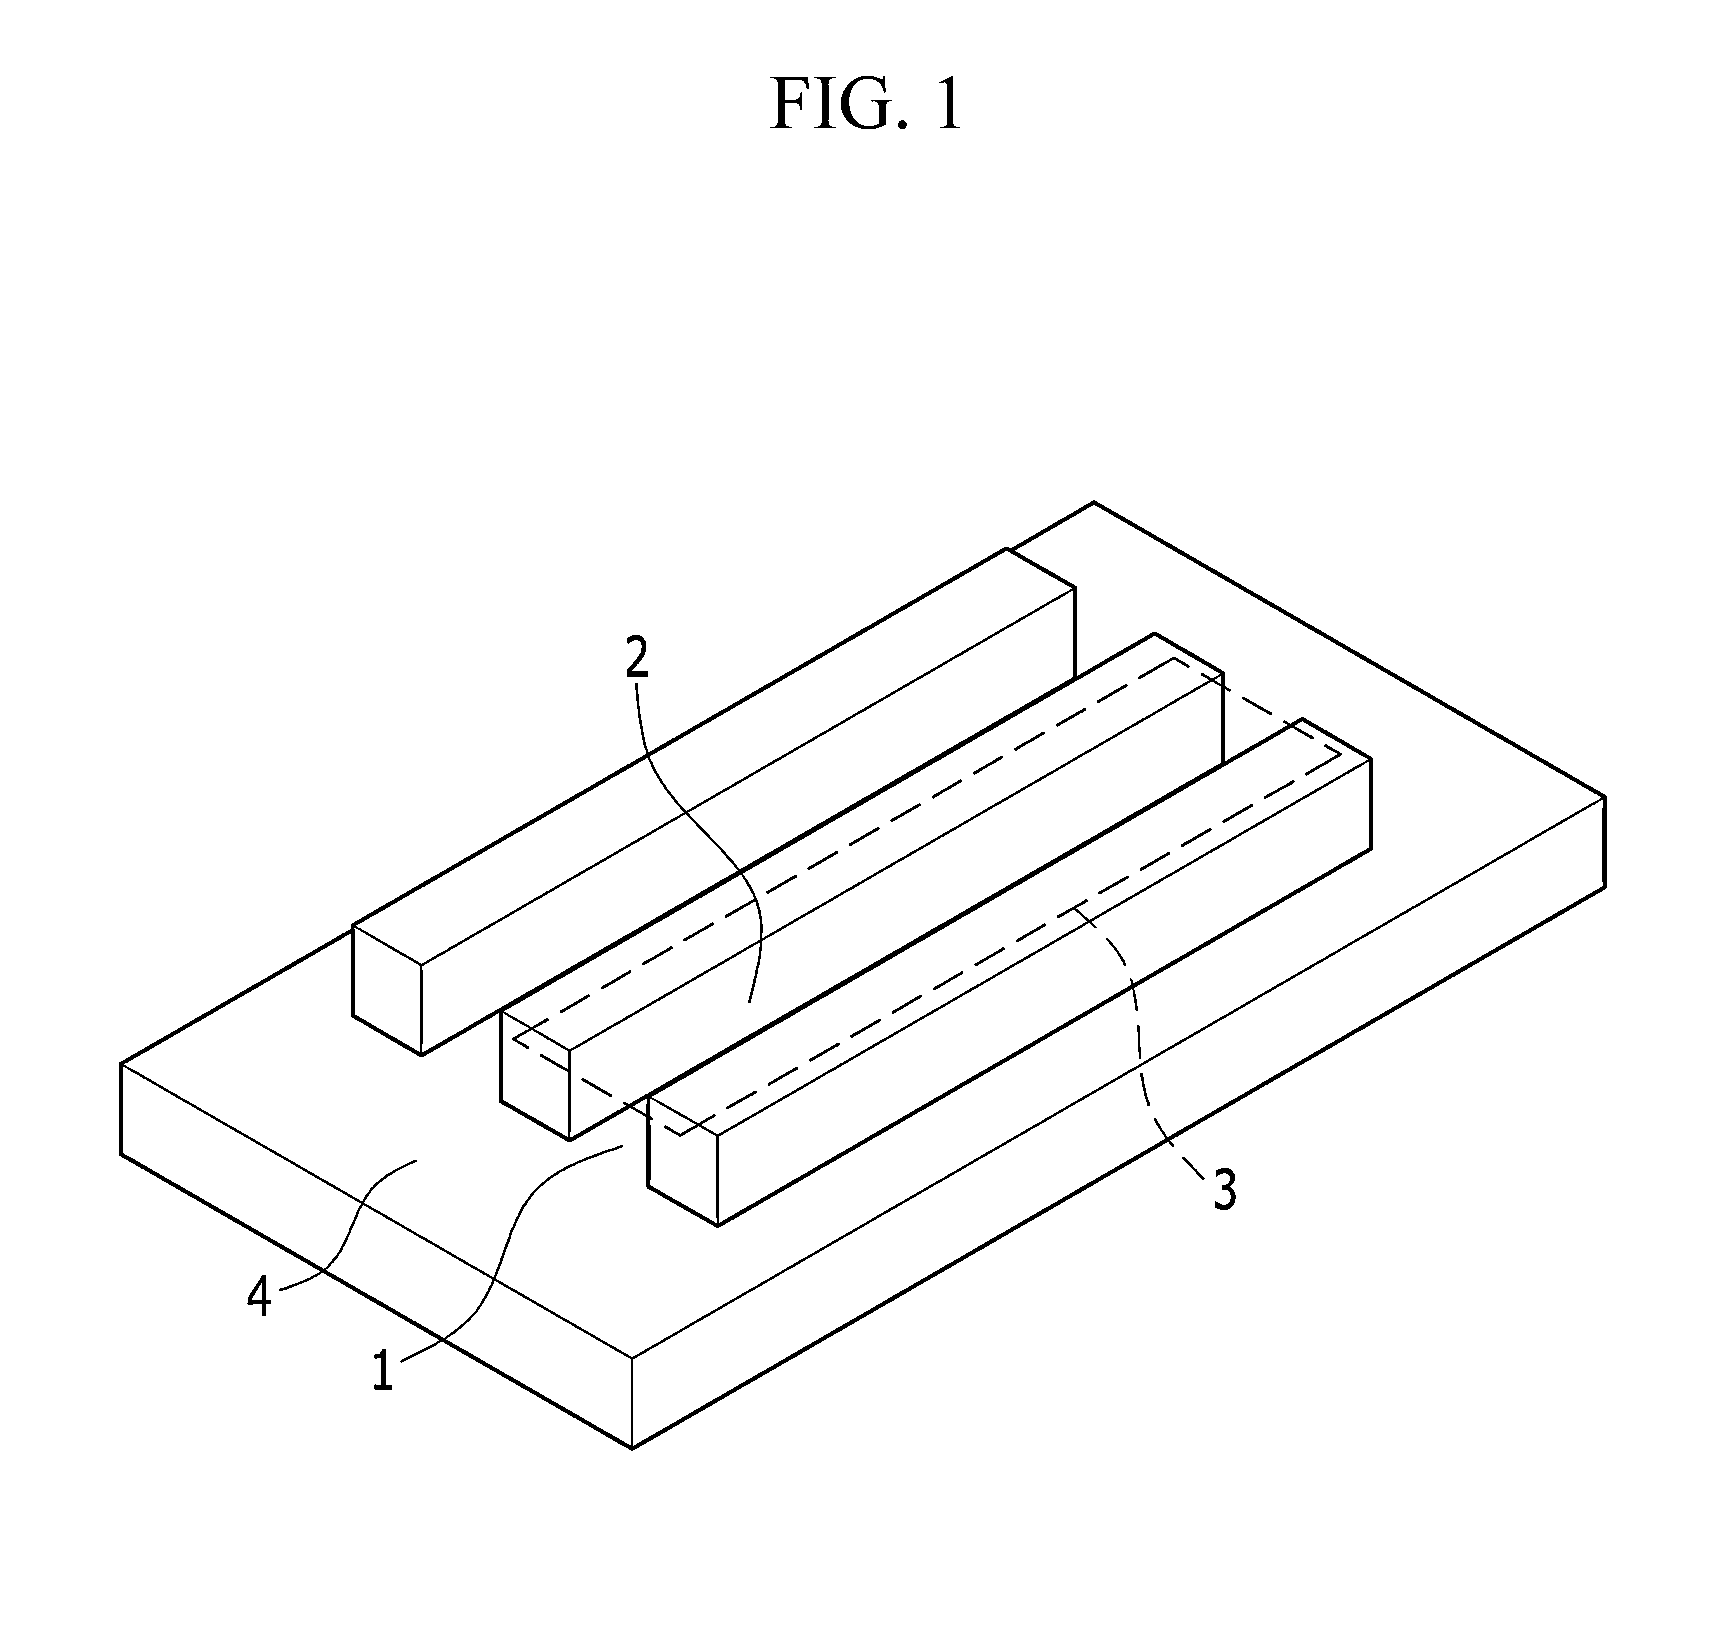 Methods of patterning block copolymer layers